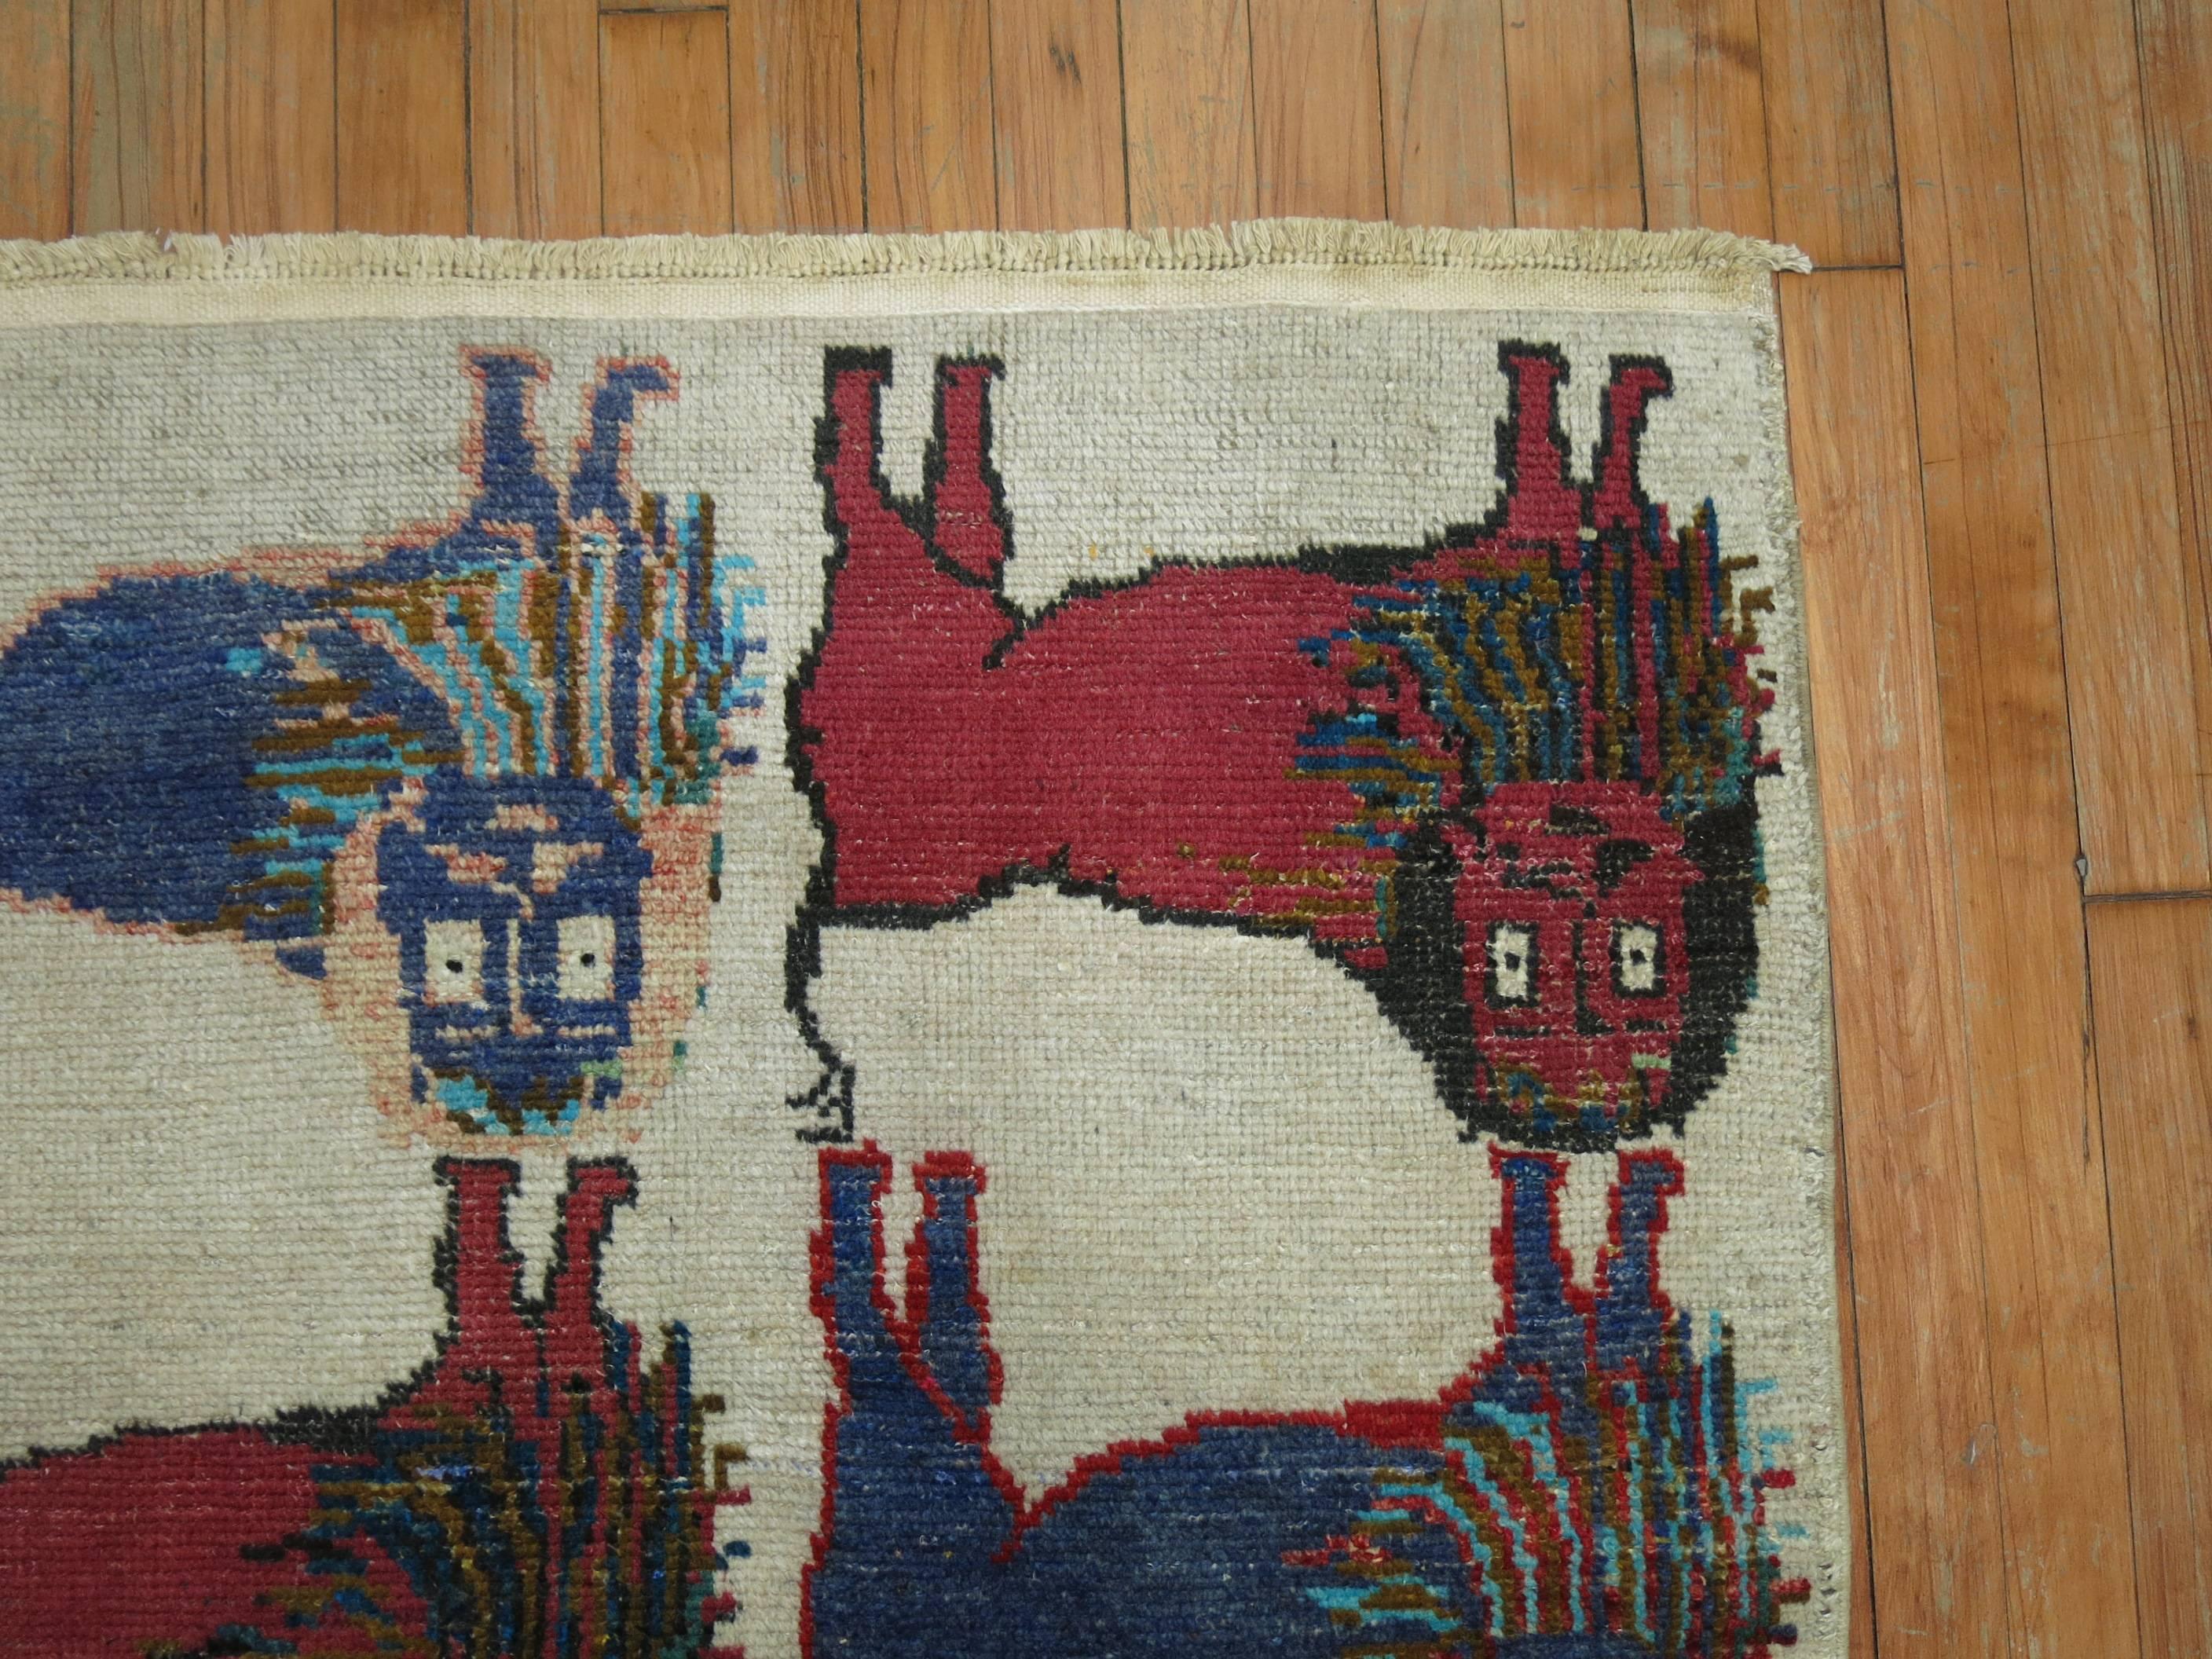 One of a kind vintage Turkish rug depicting 12 colorful lions on an ivory colored ground.